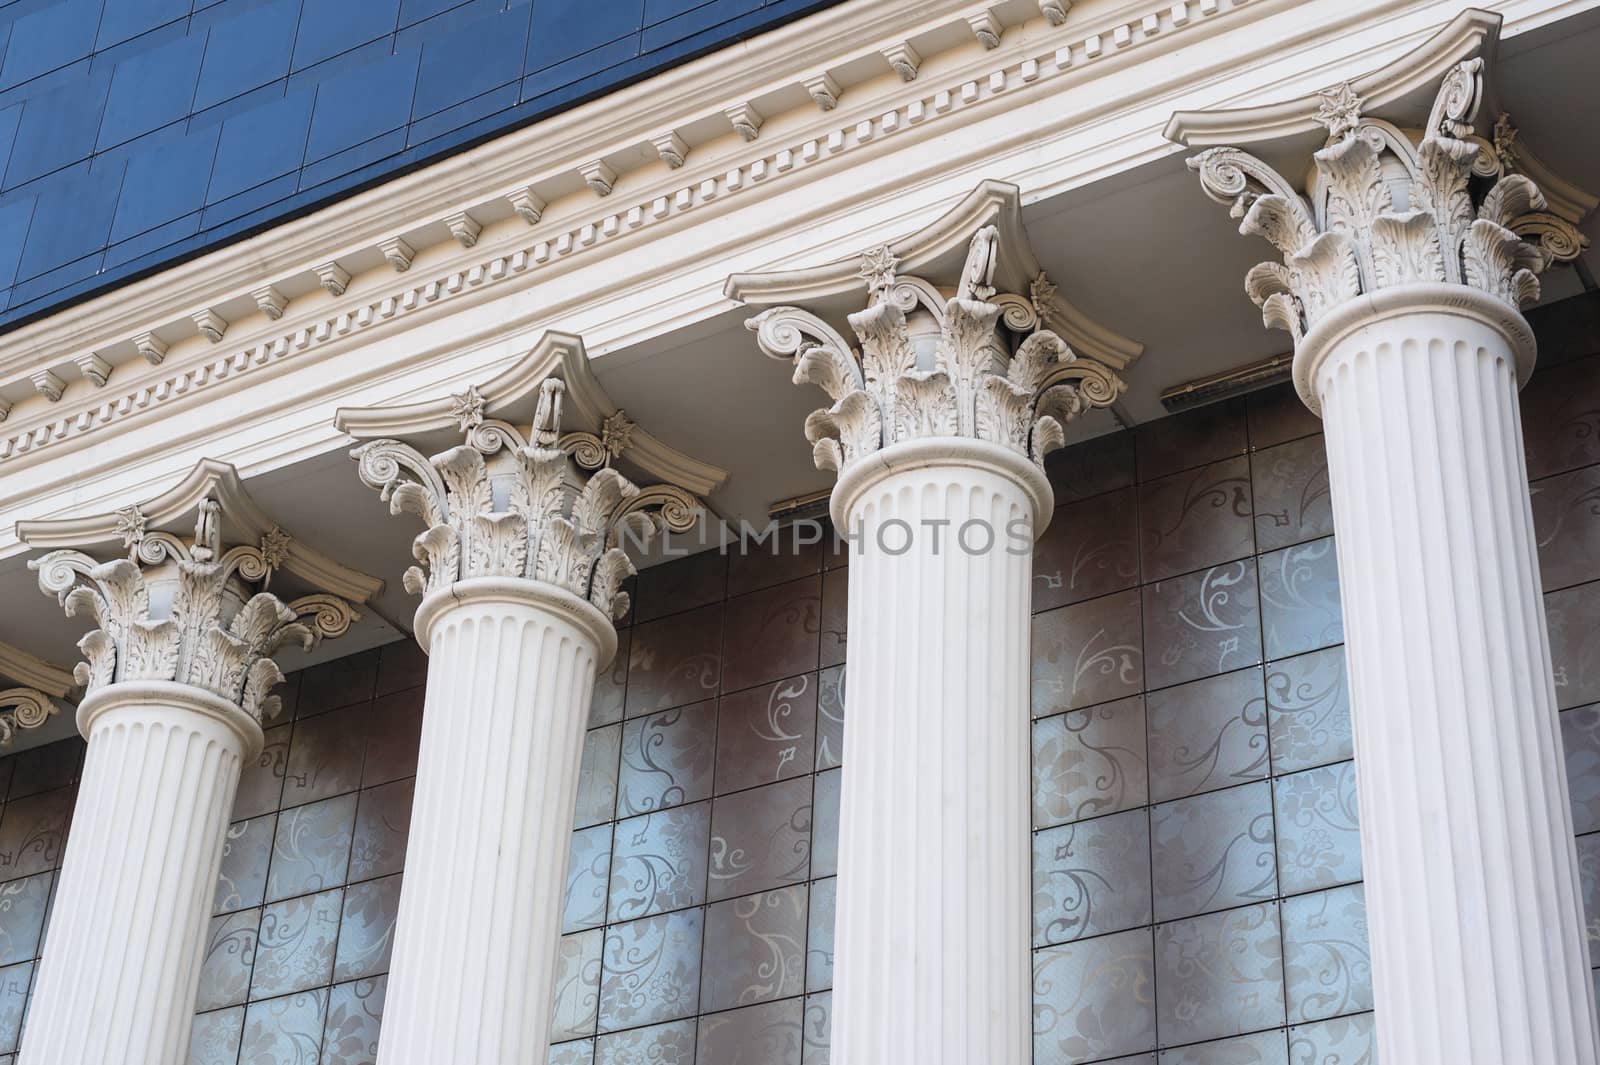 Architectural white Capital columns on the facade of the building.